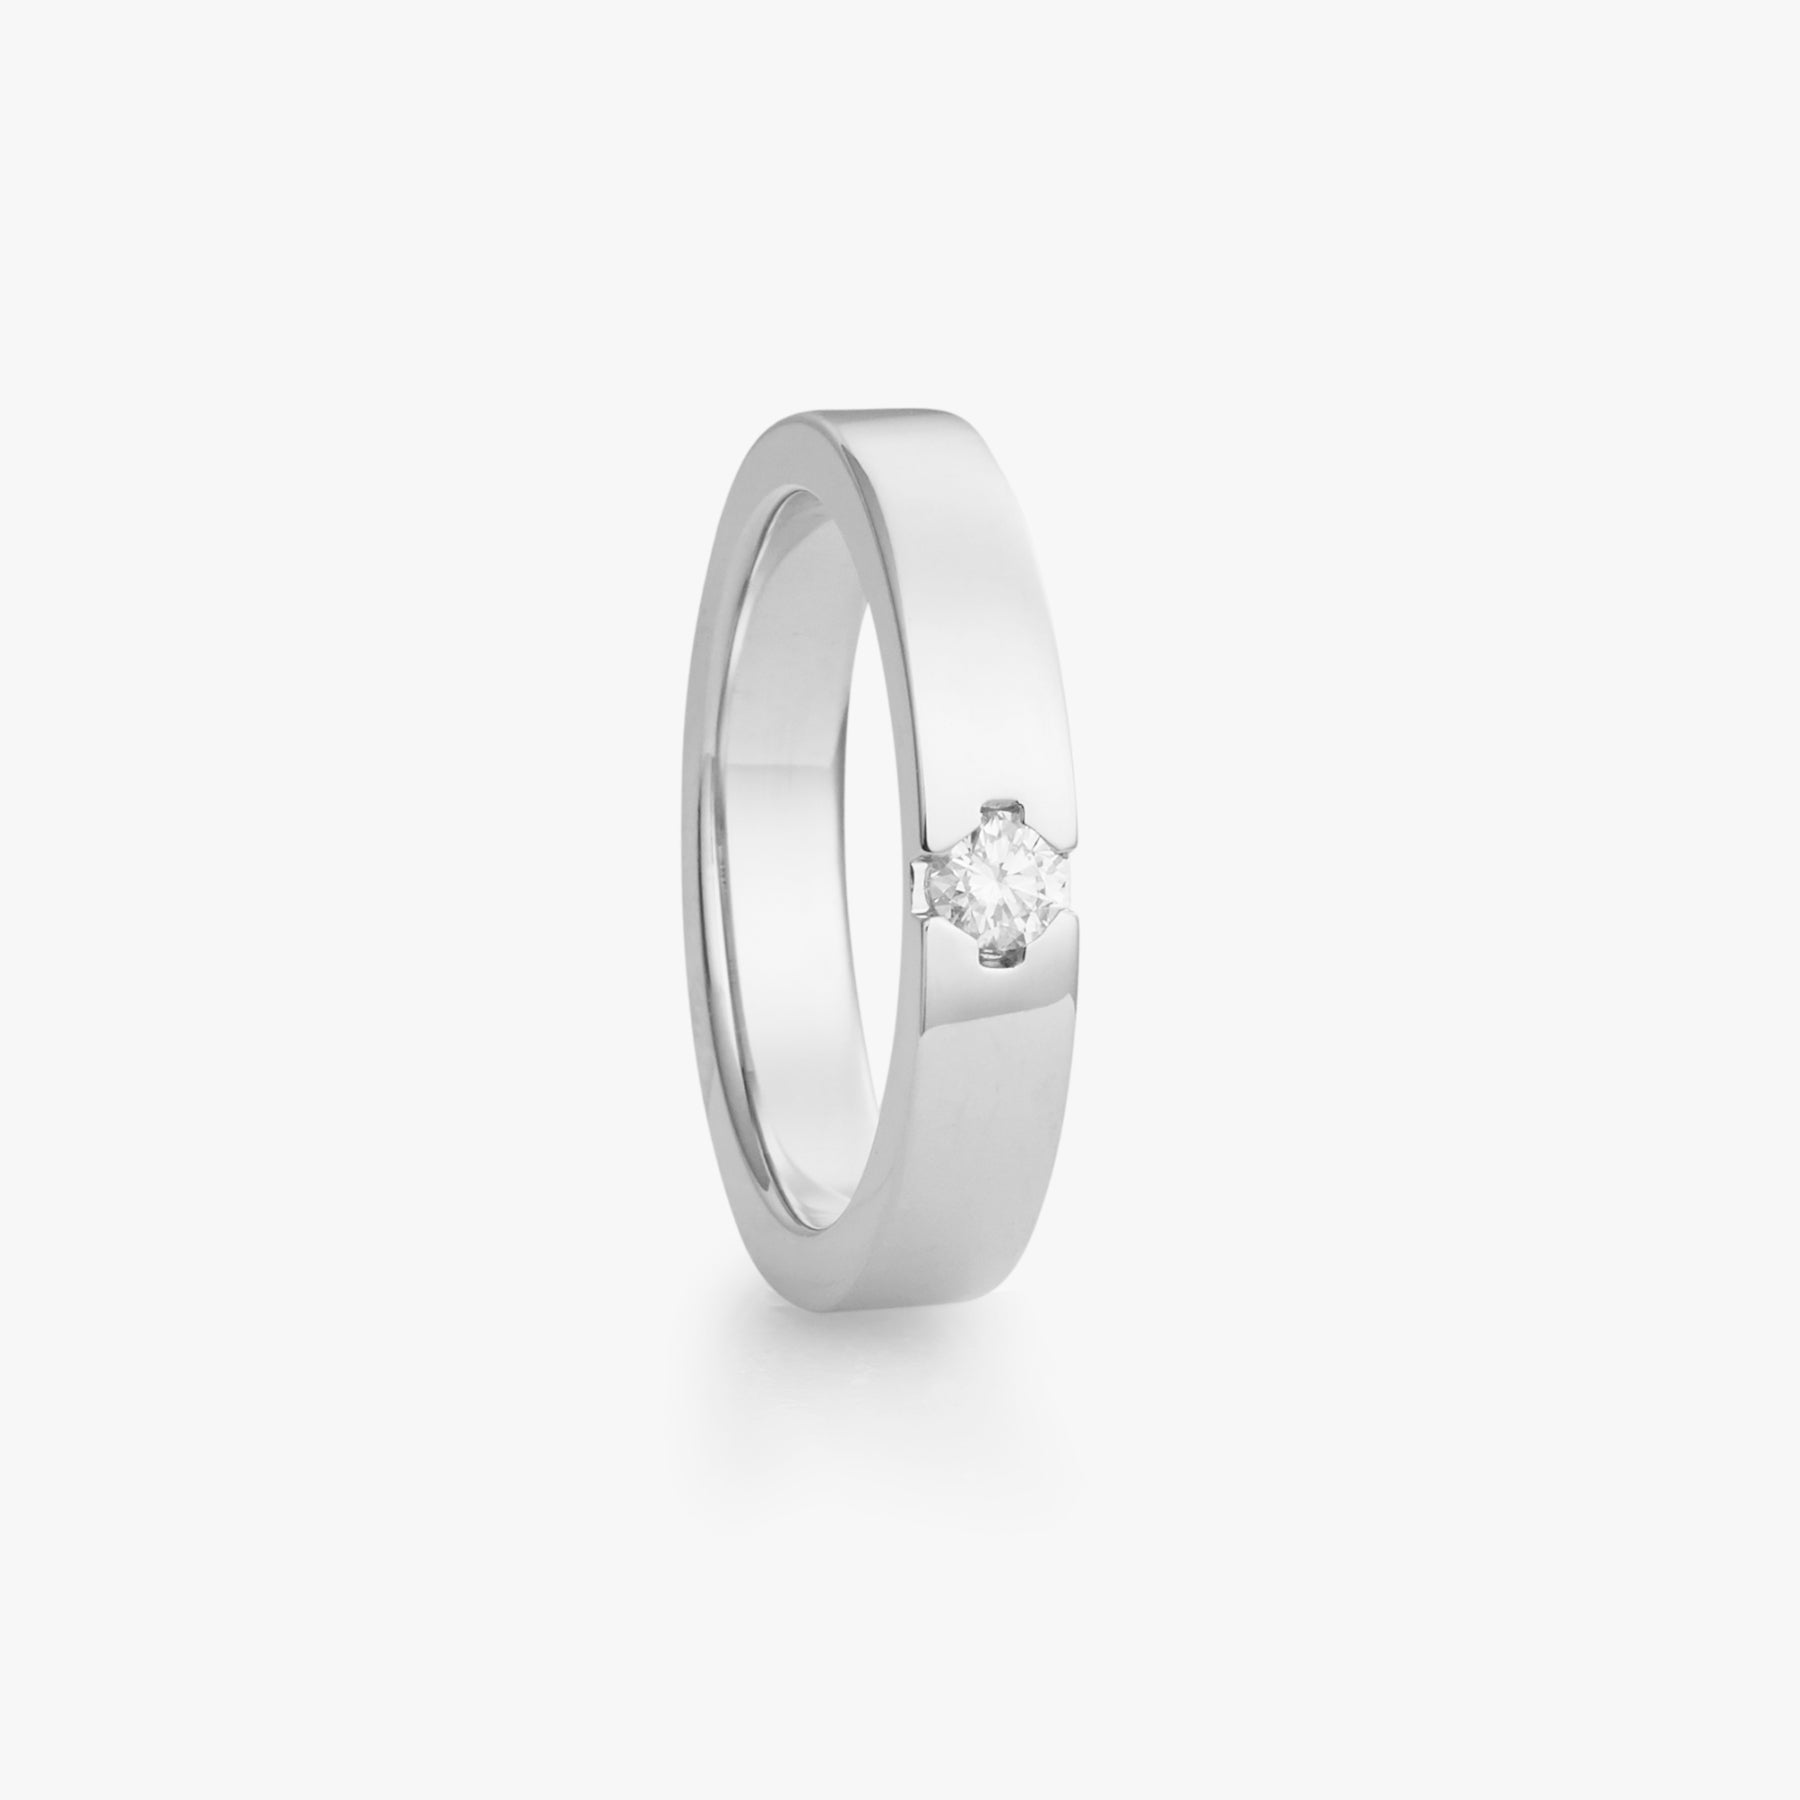 Majestic ring in white gold with diamond, ladies